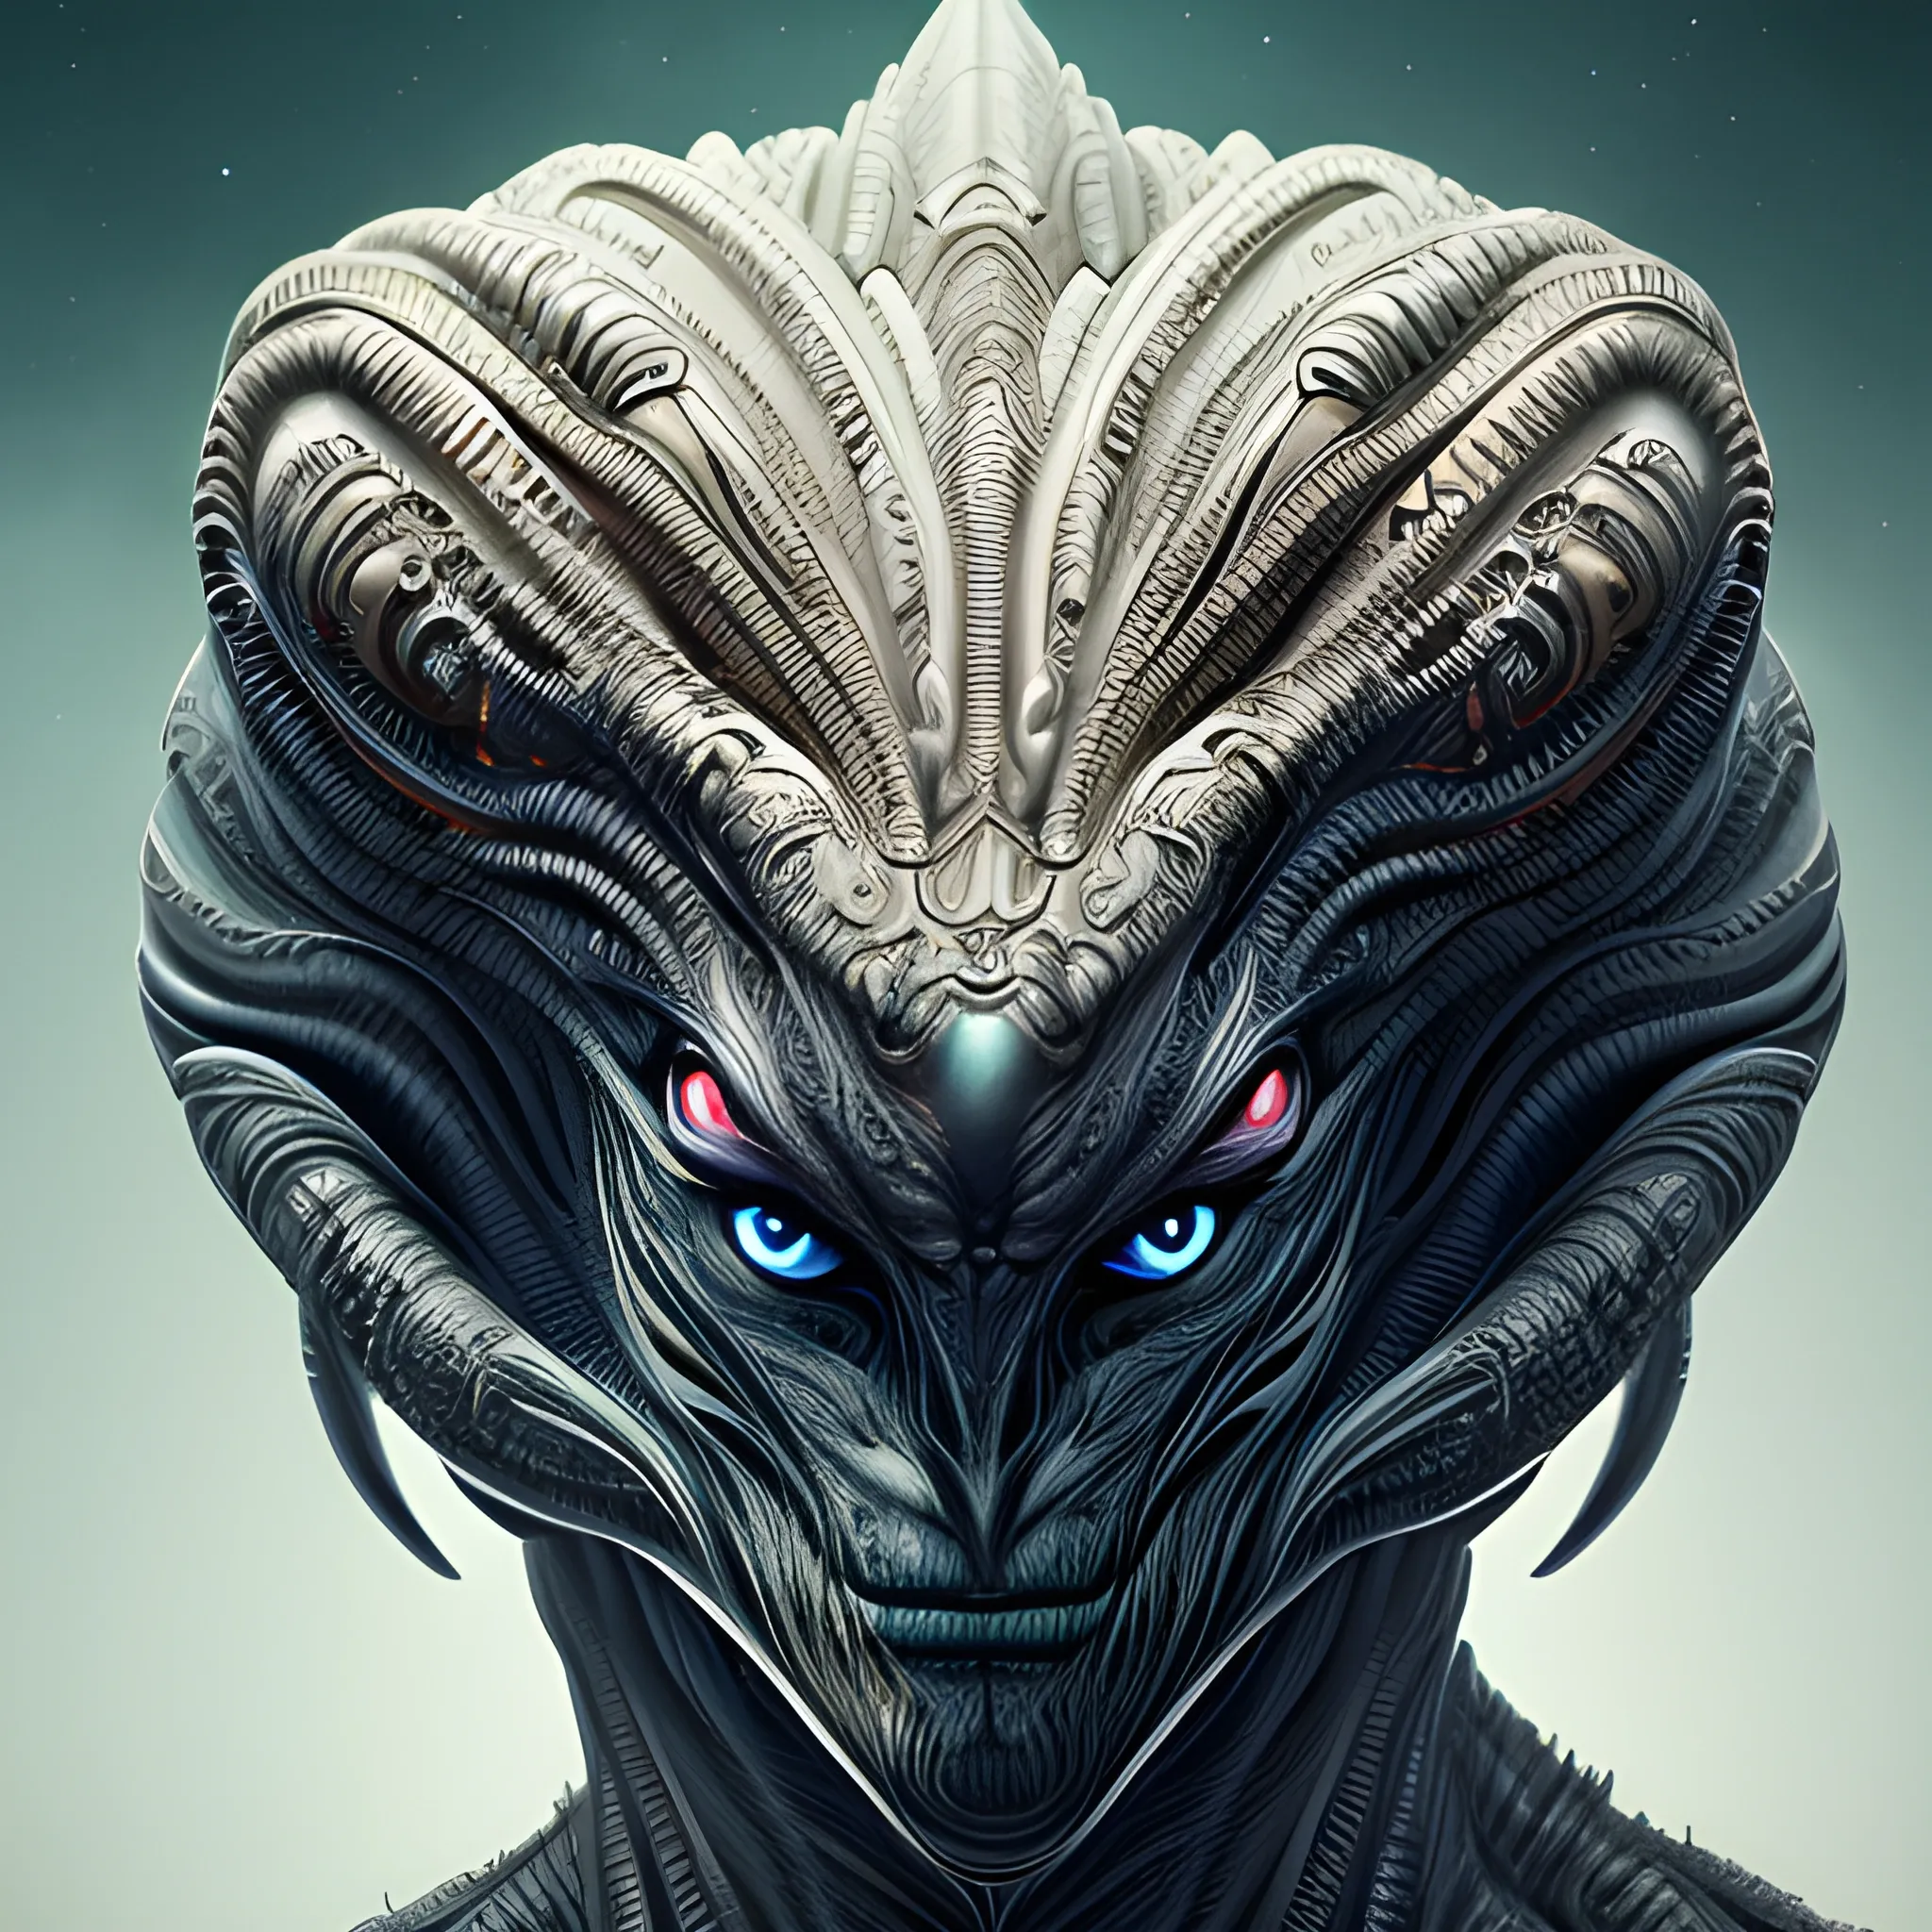 A detailed and intricate digital art piece in a cinematic style, this ultra high resolution portrait of a powerful alien beast is a true masterpiece